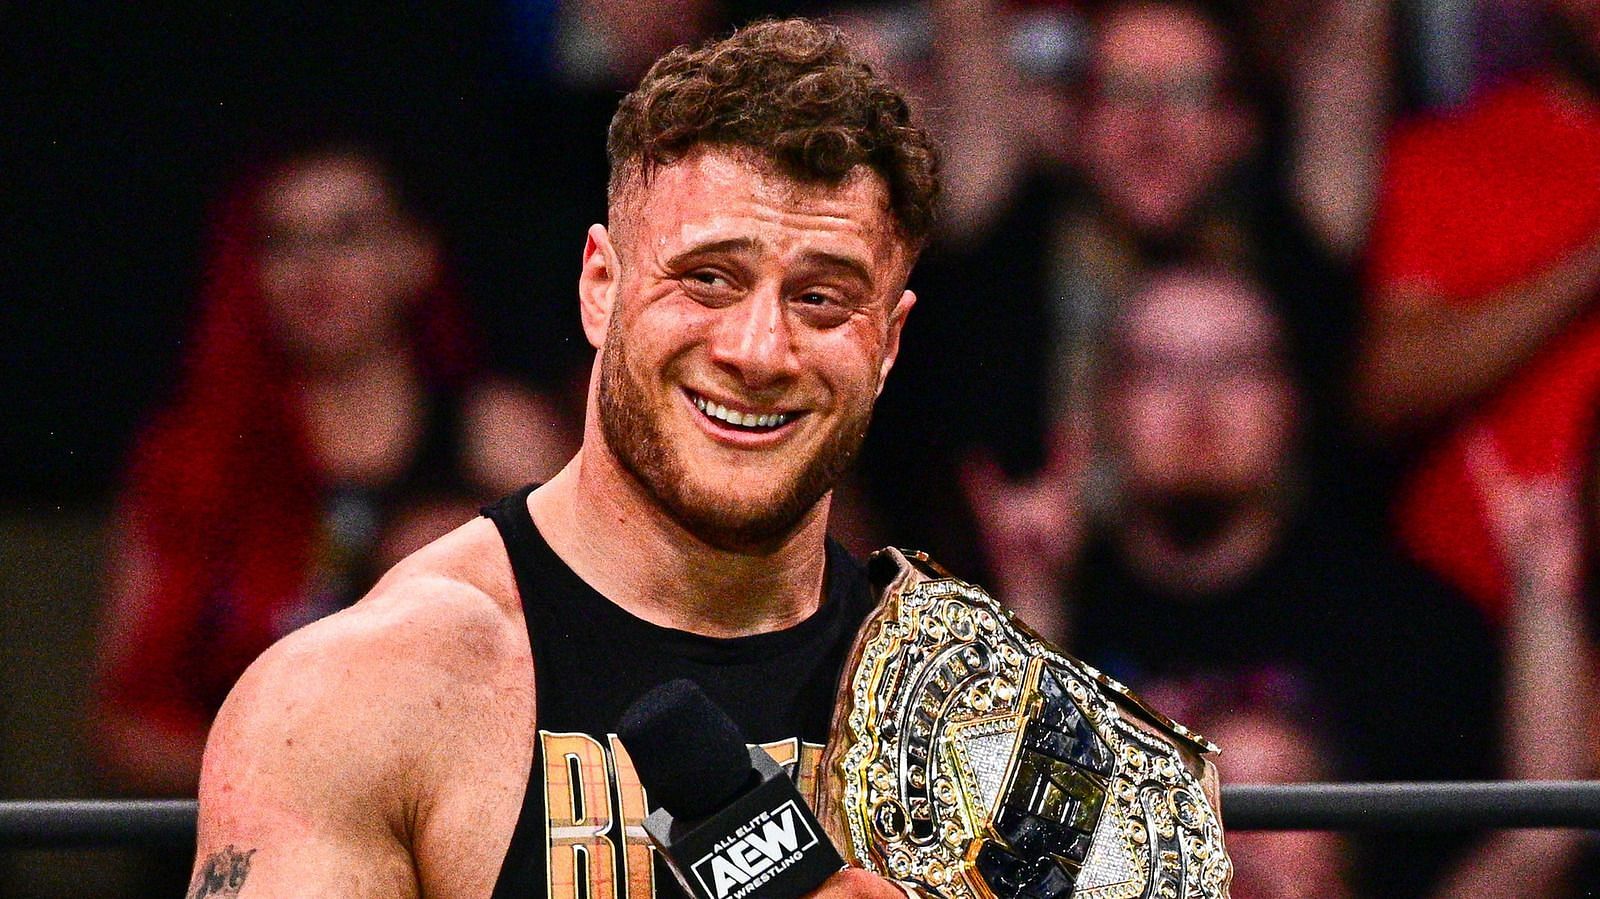 MJF is the longest reigning AEW World Champion of all time